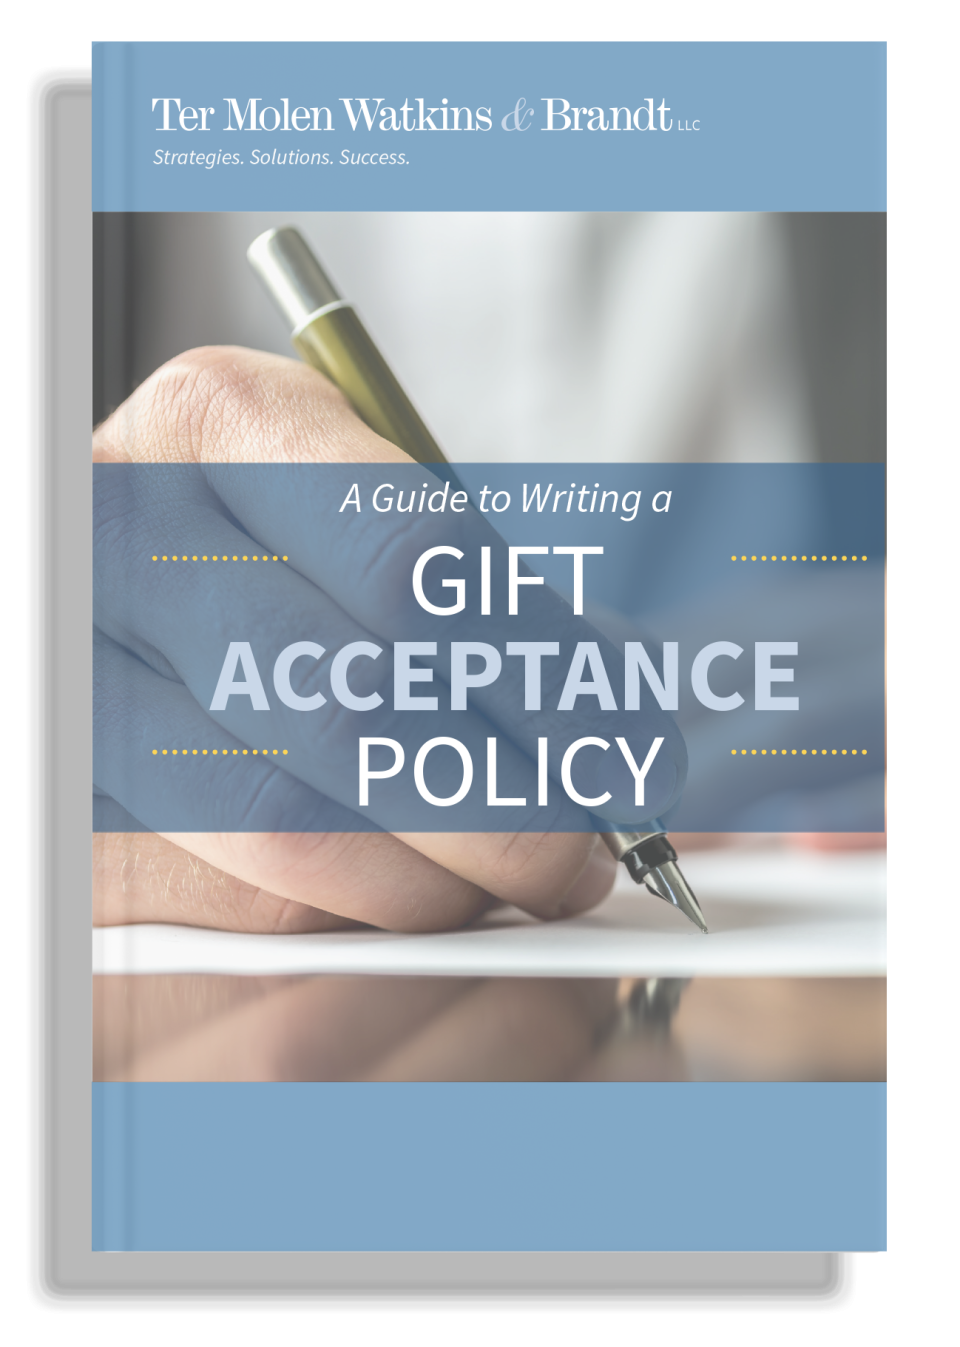 Gift Acceptance Policy Download